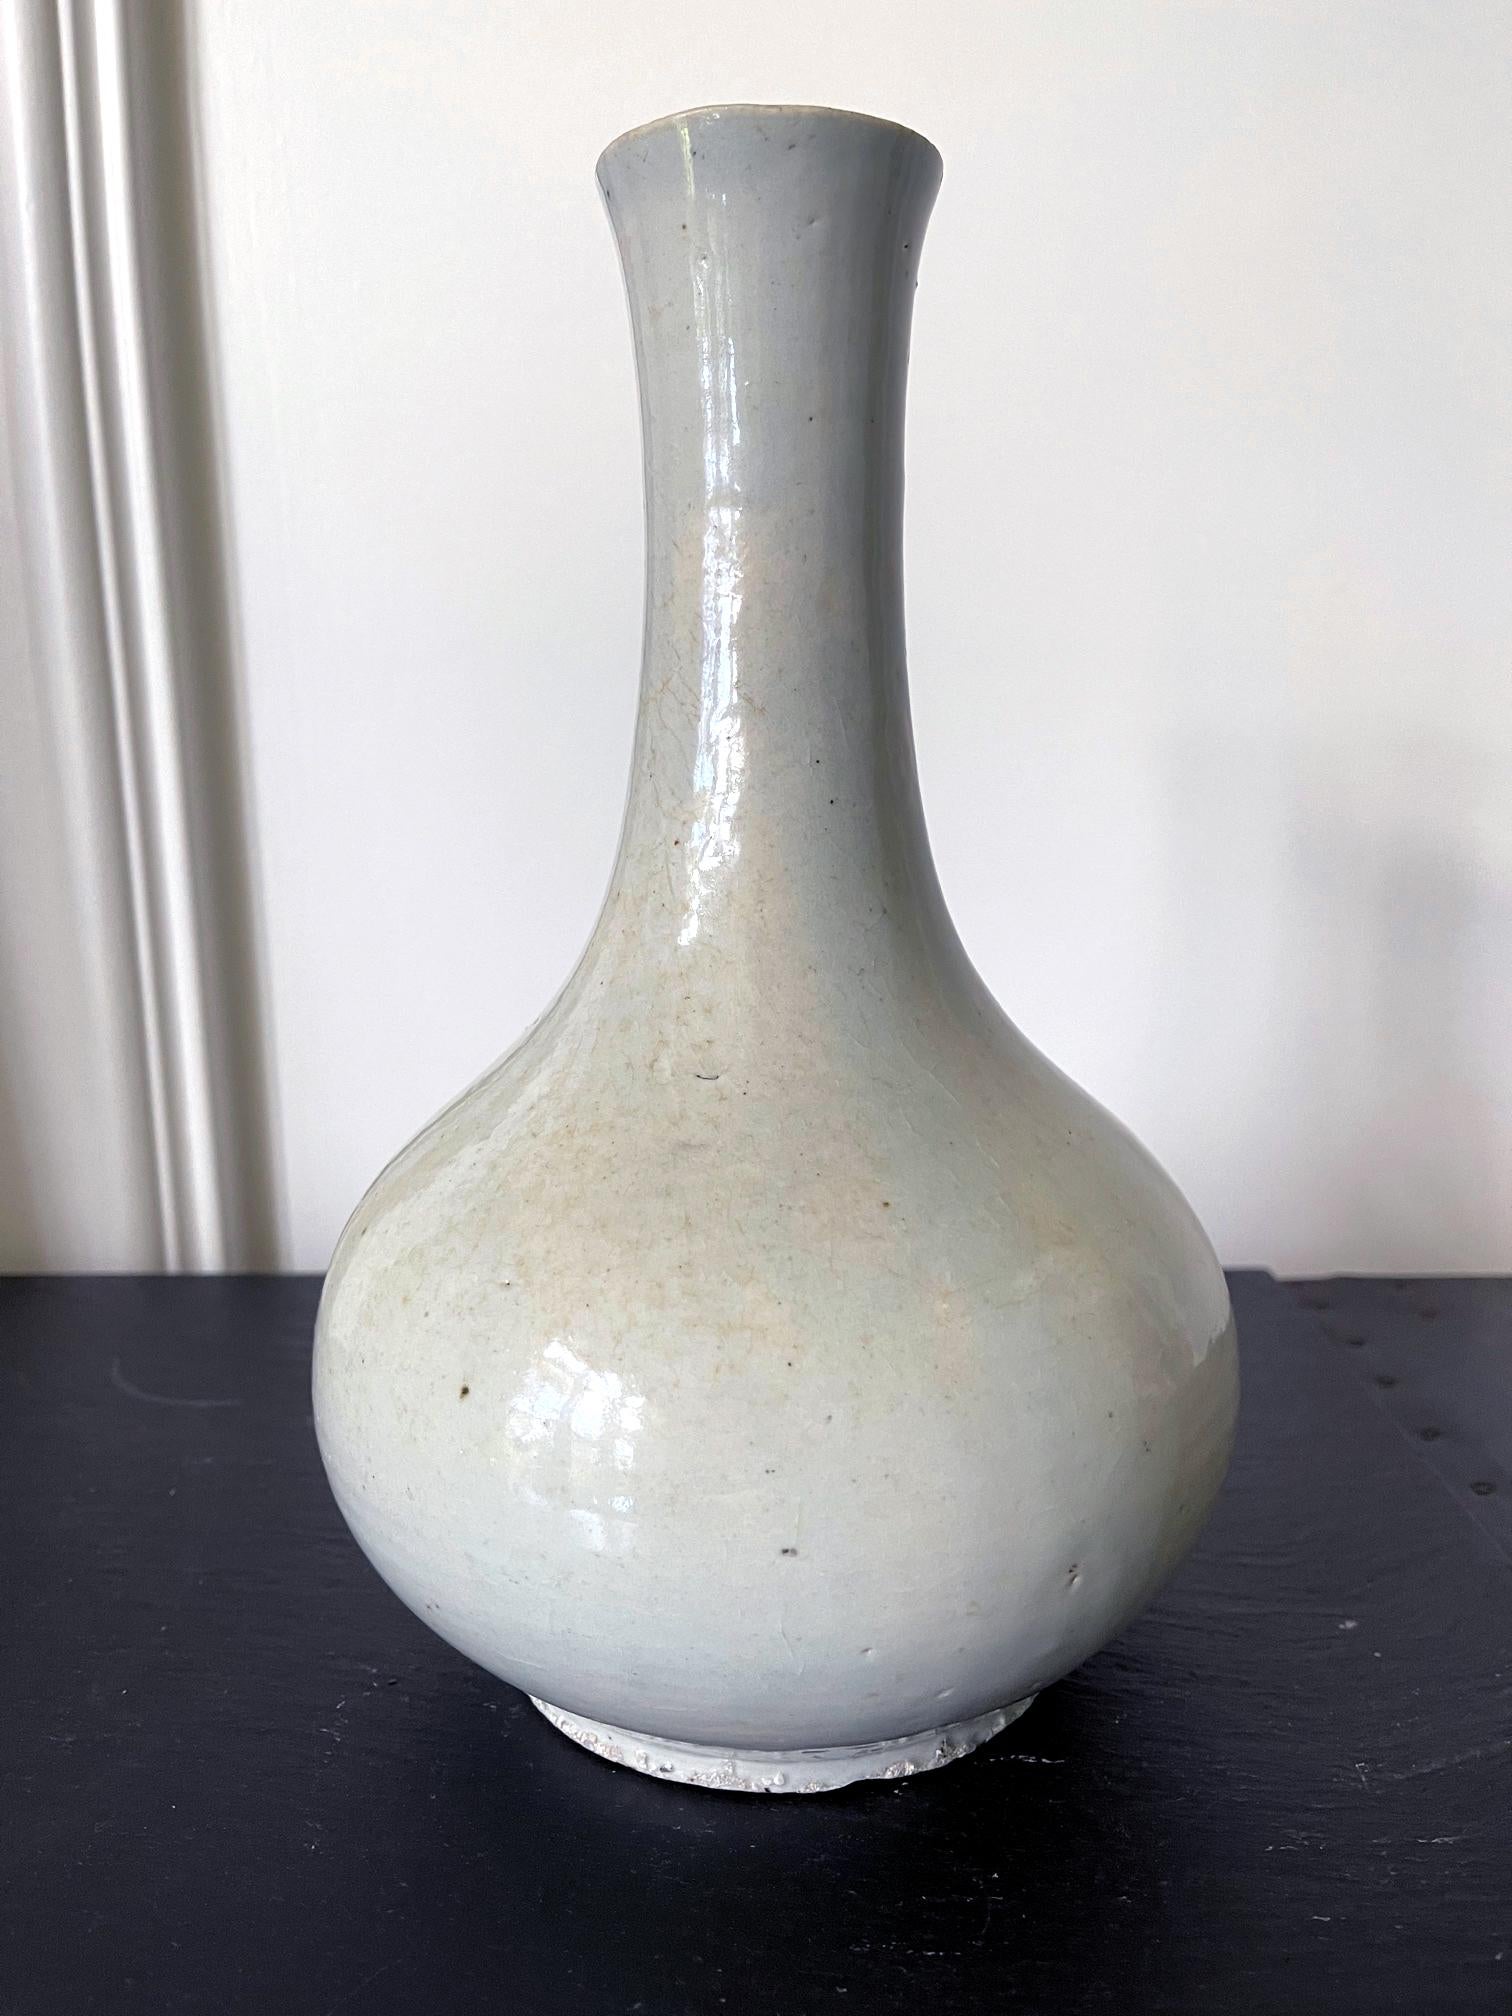 On offer is a Korean ceramic bottle vase circa 19th century made in the late Joseon dynasty (1392-1910). The vase is of a classic bottle form with a bulbous body and a long neck with a slightly rolled mouth rum. The all over glaze is white with a